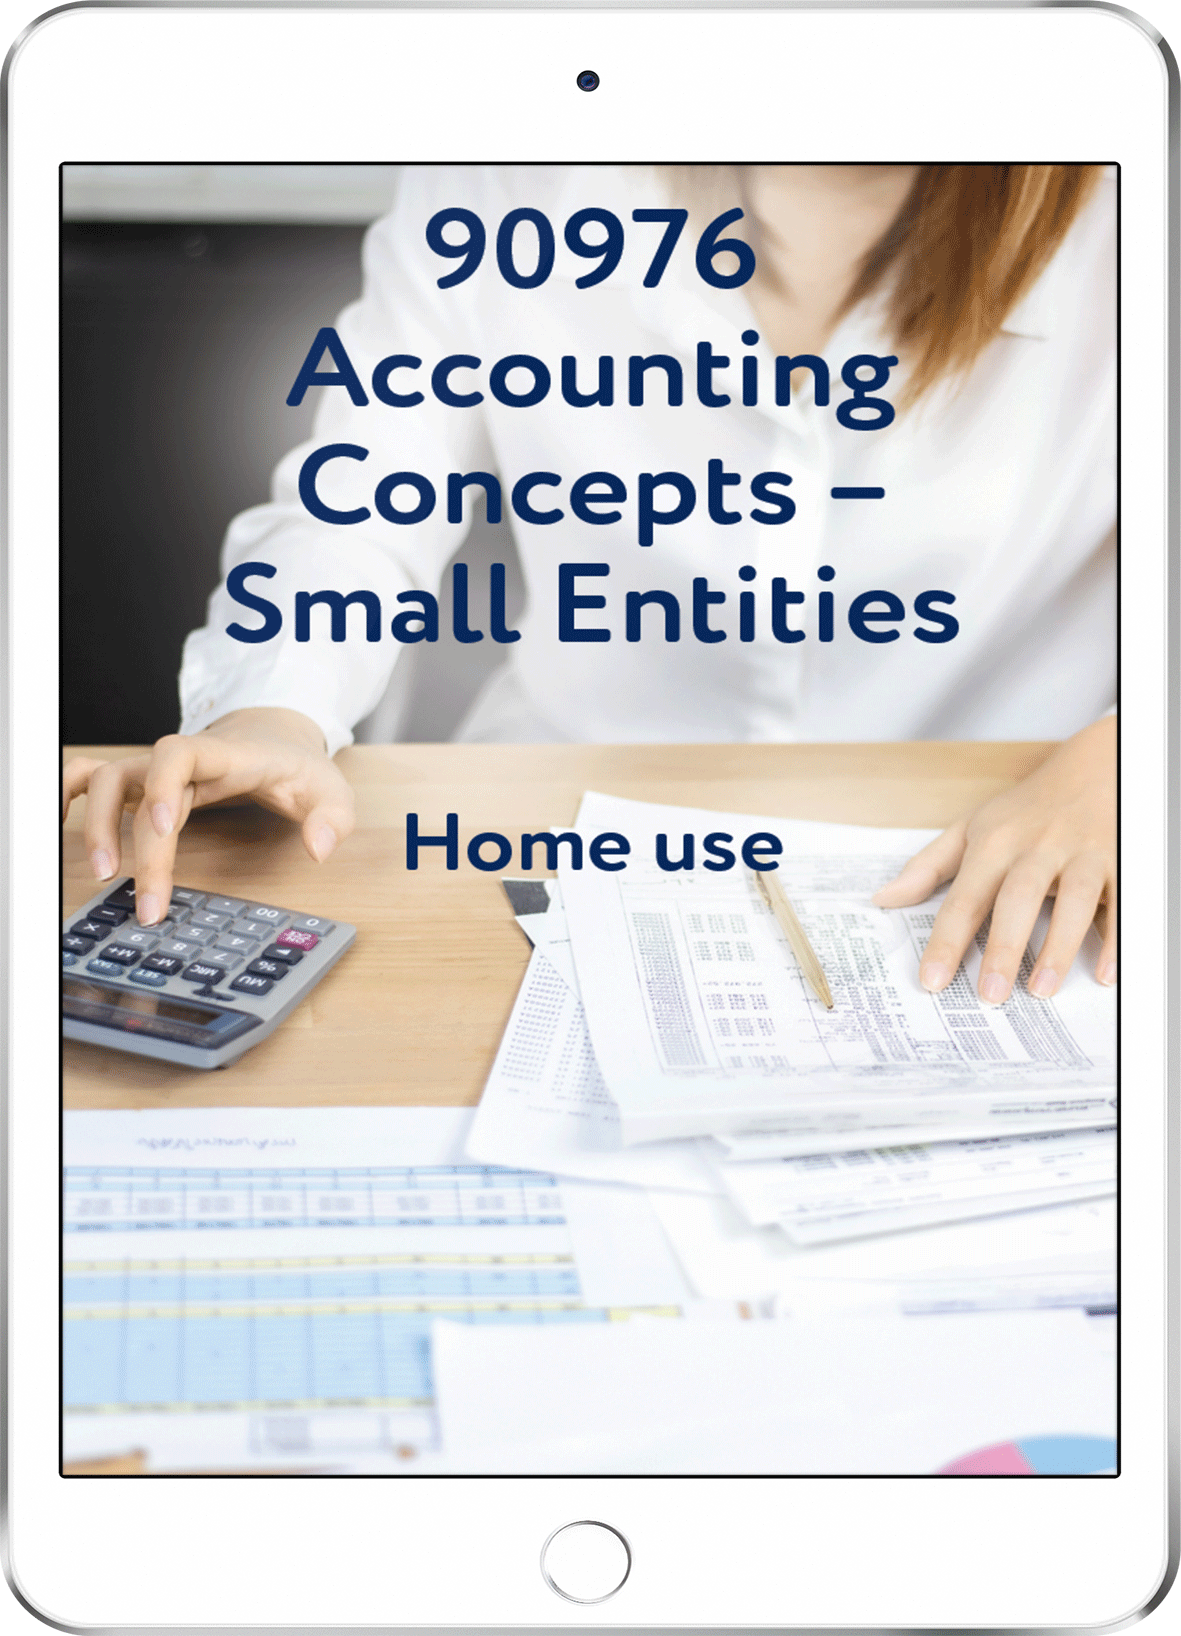 90976 Accounting Concepts - Small Entities - Home Use